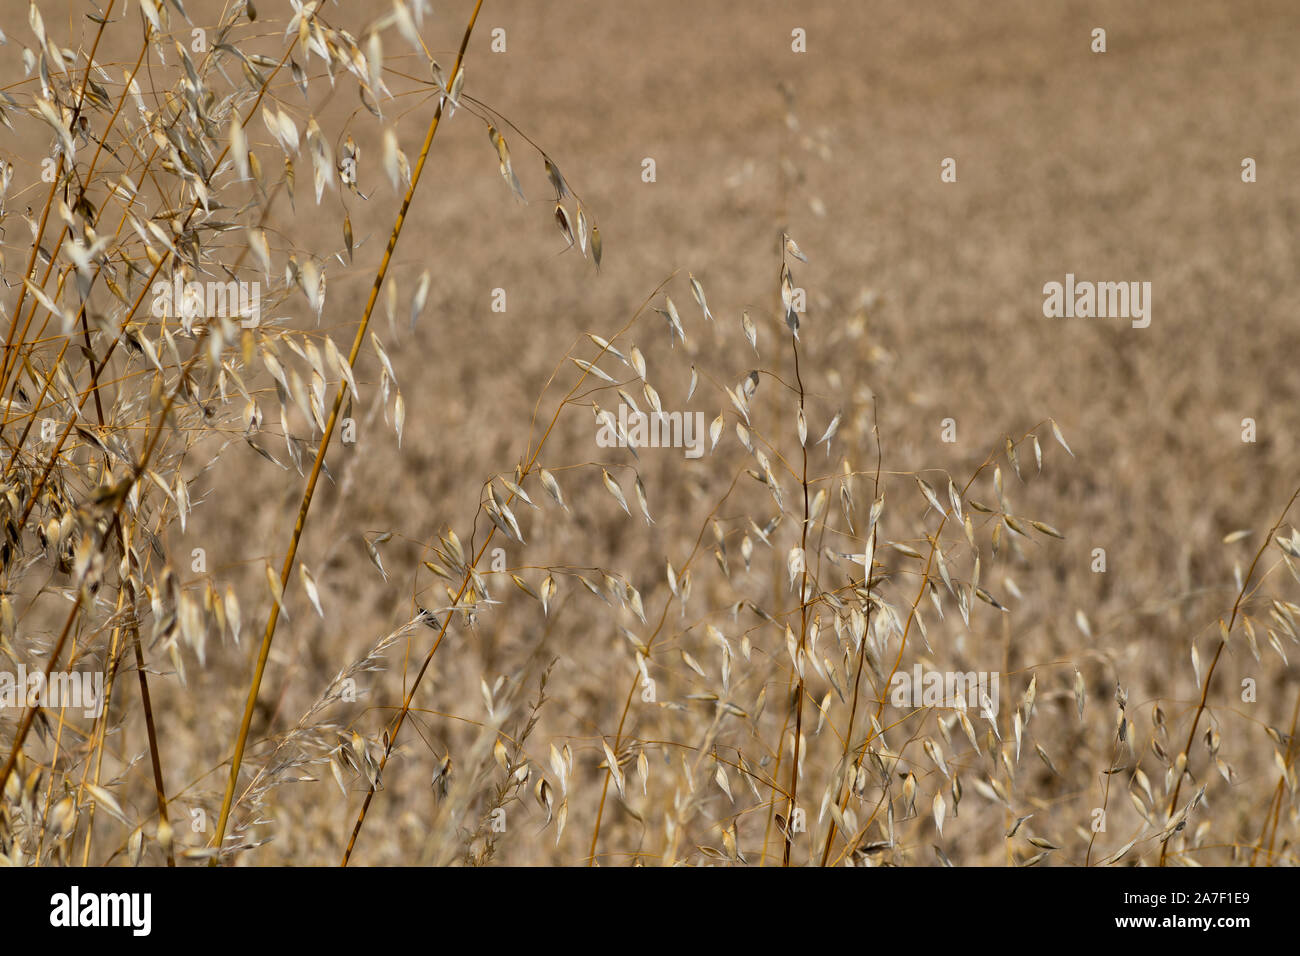 Grass seed growing on edge of farmland field with shallow depth of field Stock Photo